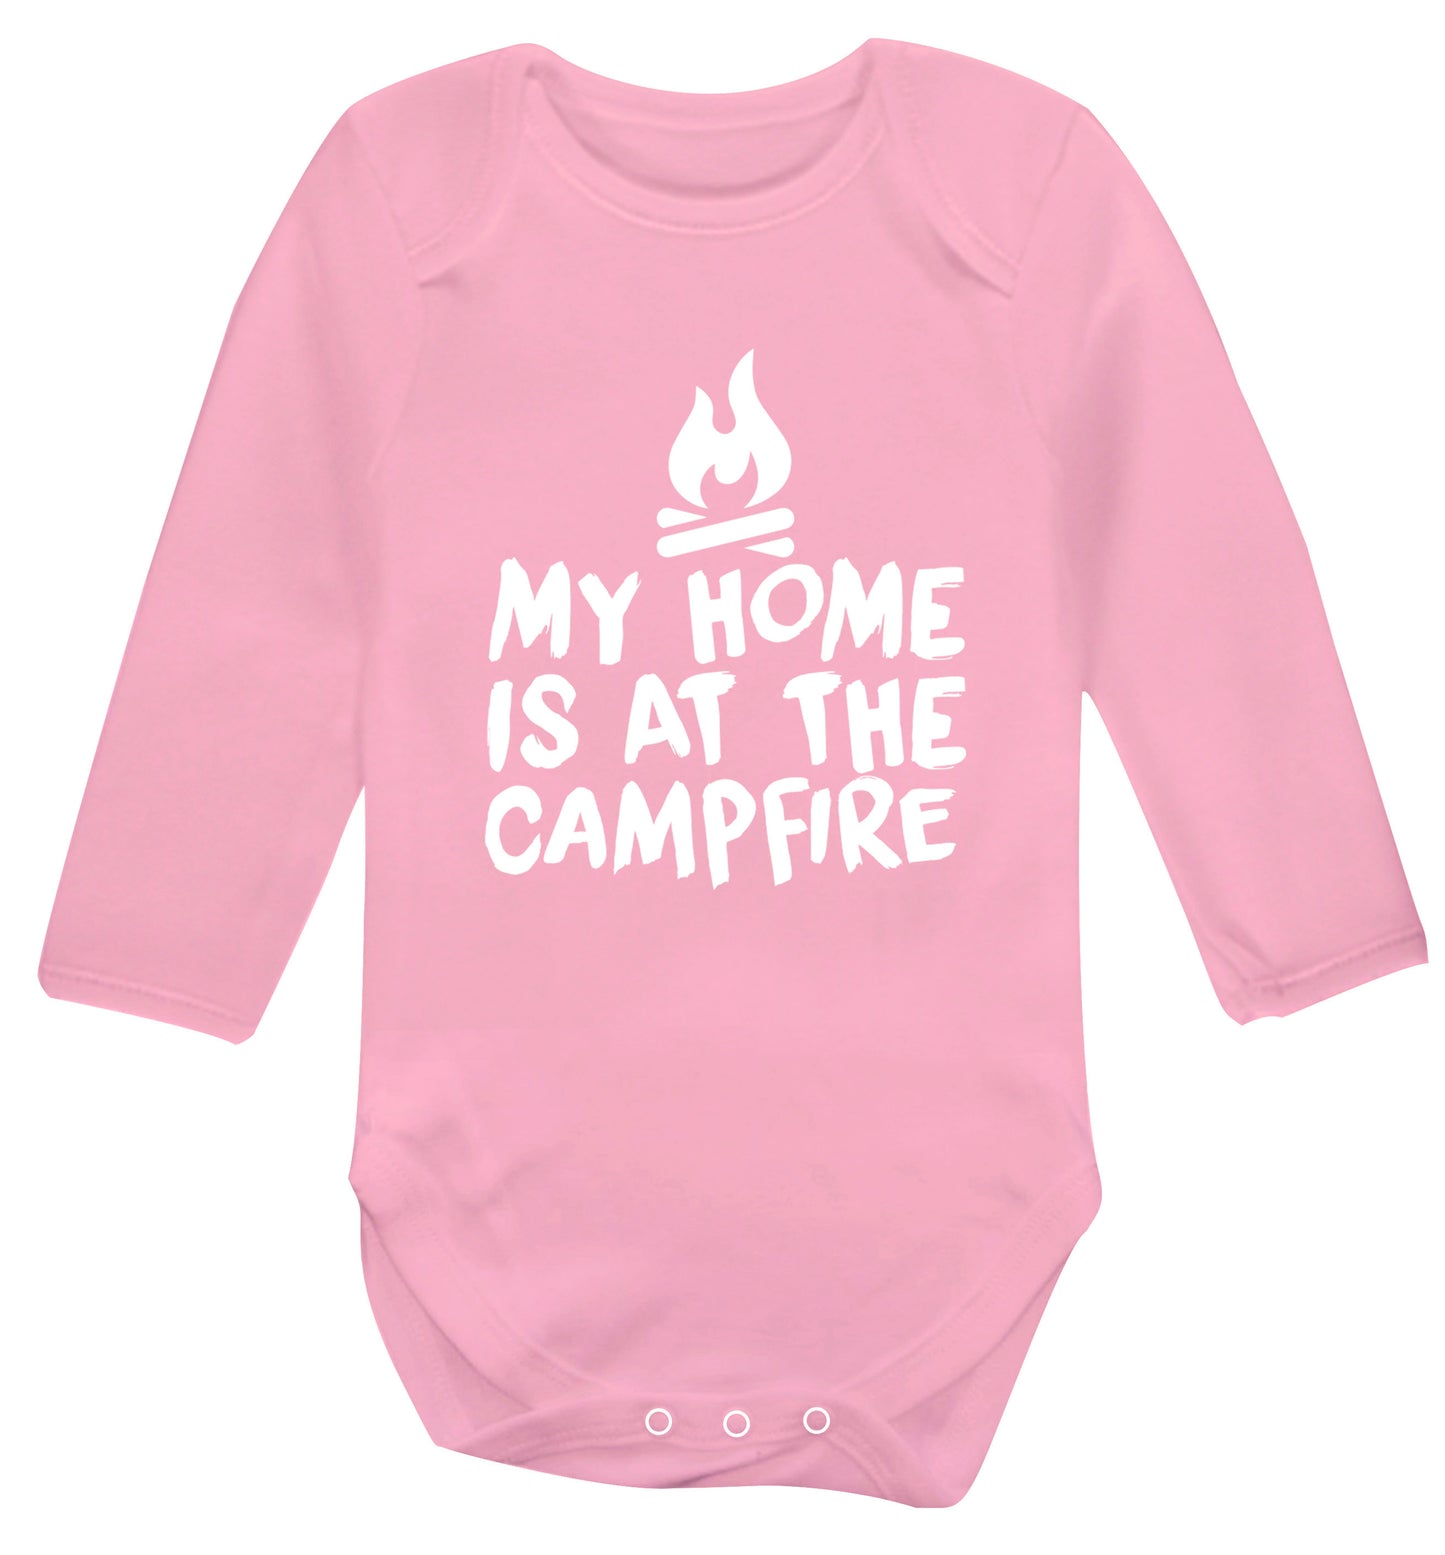 My home is at the campfire Baby Vest long sleeved pale pink 6-12 months